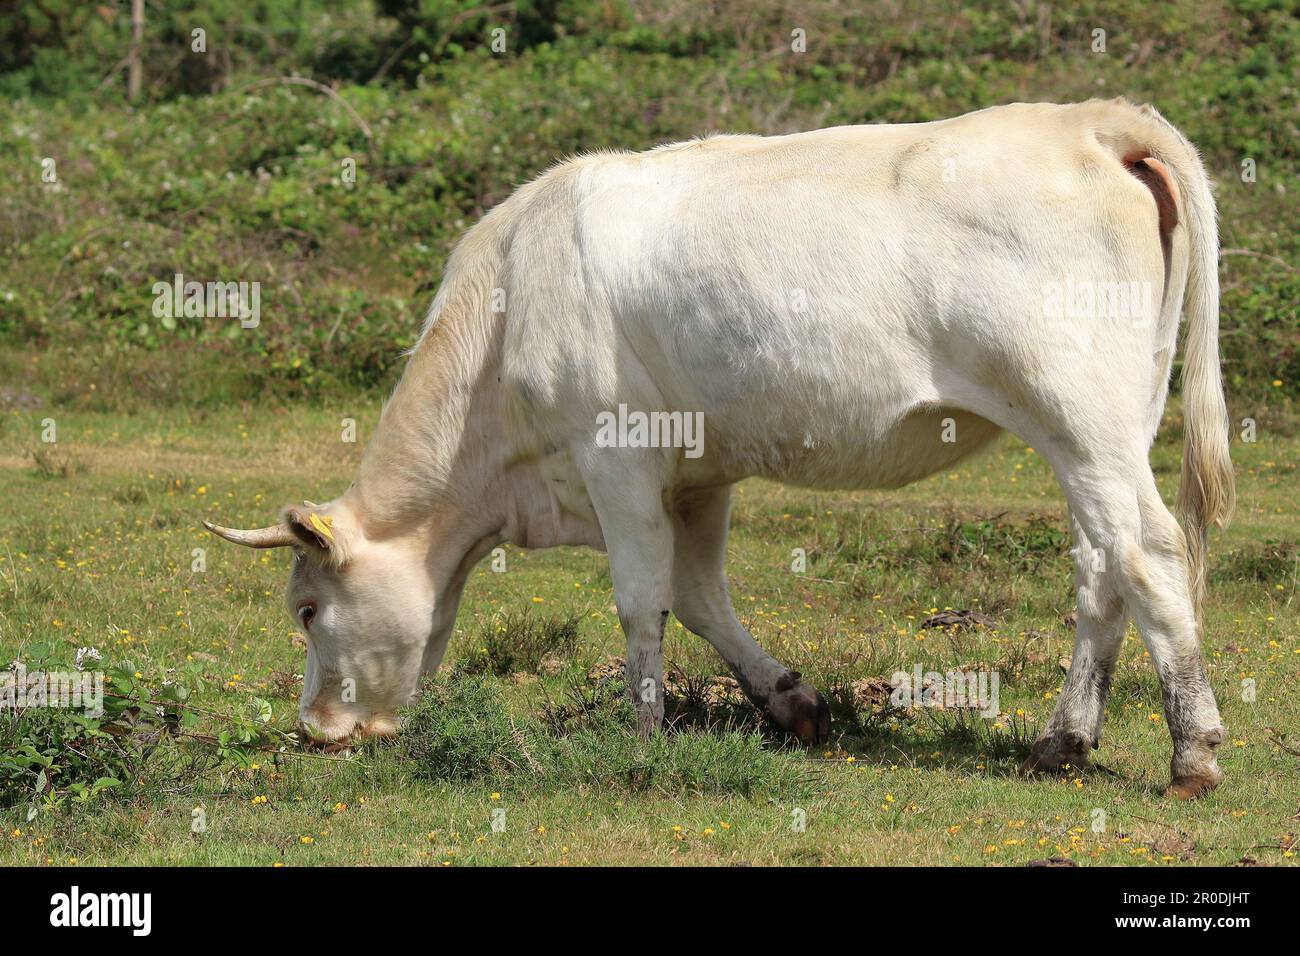 A white cow with horns eating grass in the New Forest, with bushes in the background Stock Photo